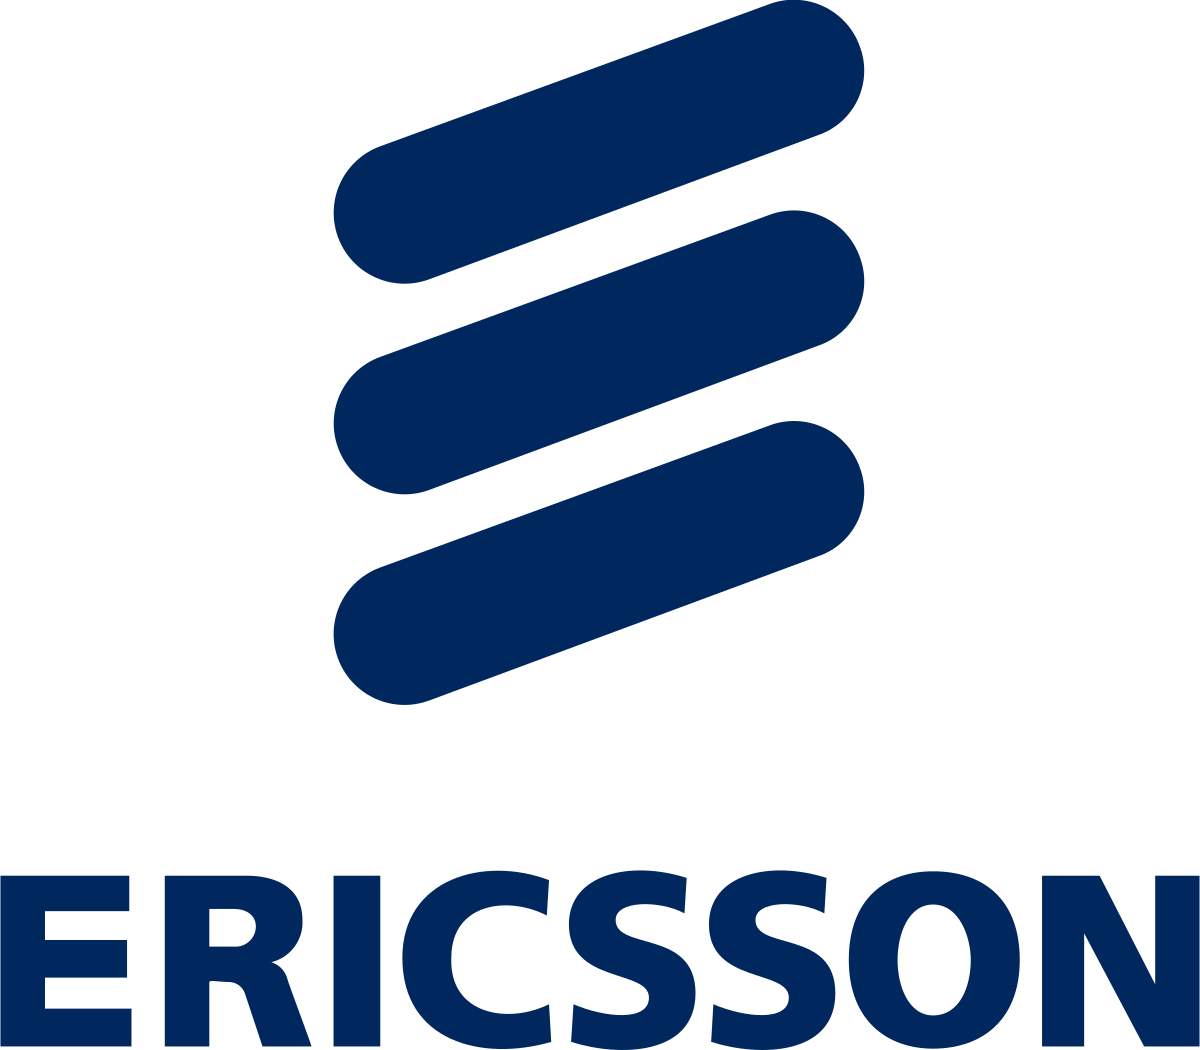 Ericsson – Digital Consulting for Smart Application